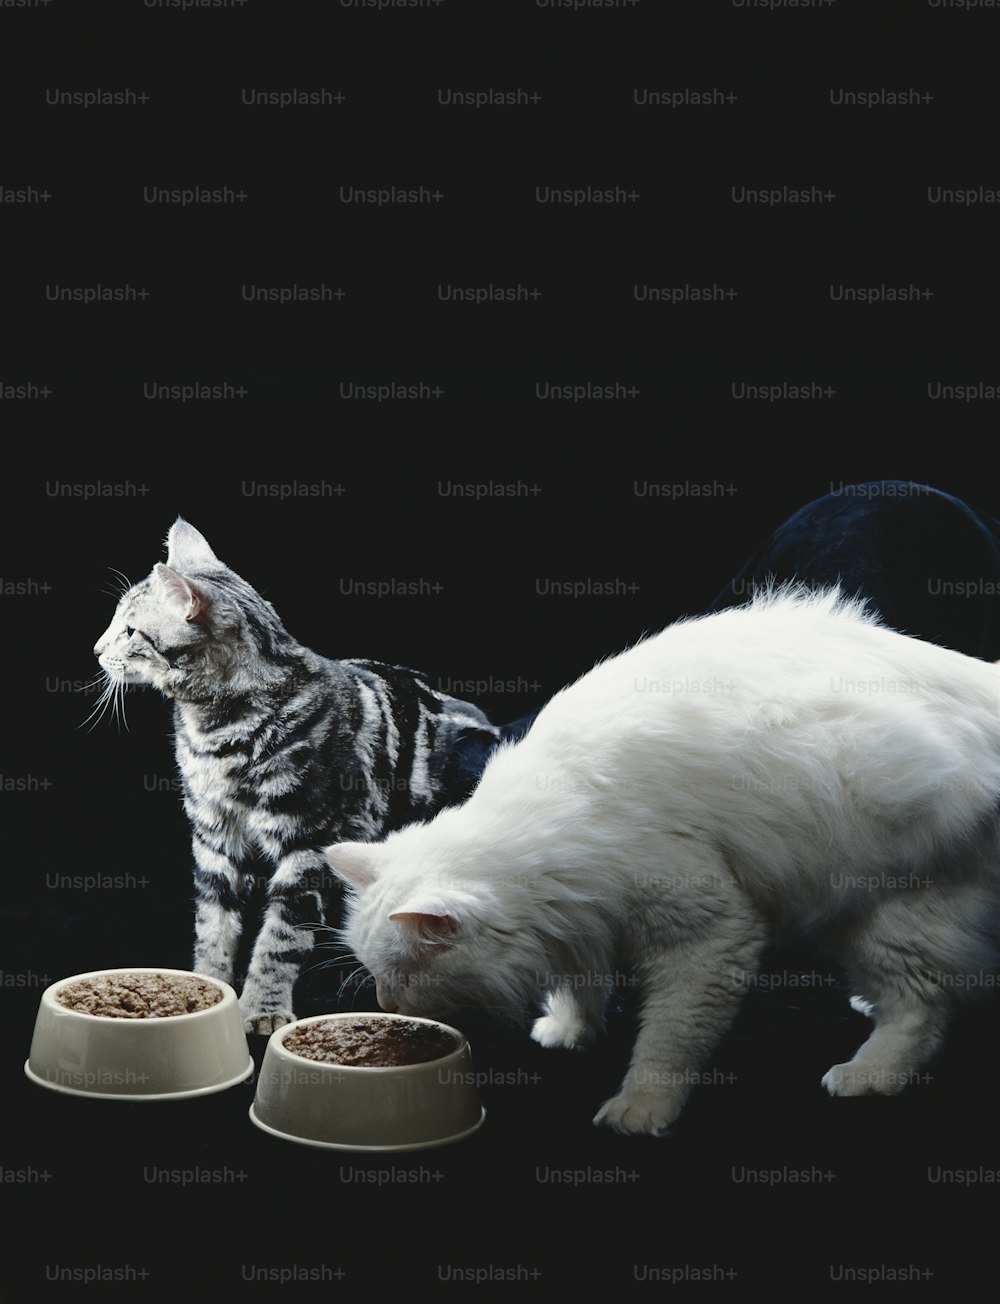 a cat eating out of a bowl next to another cat